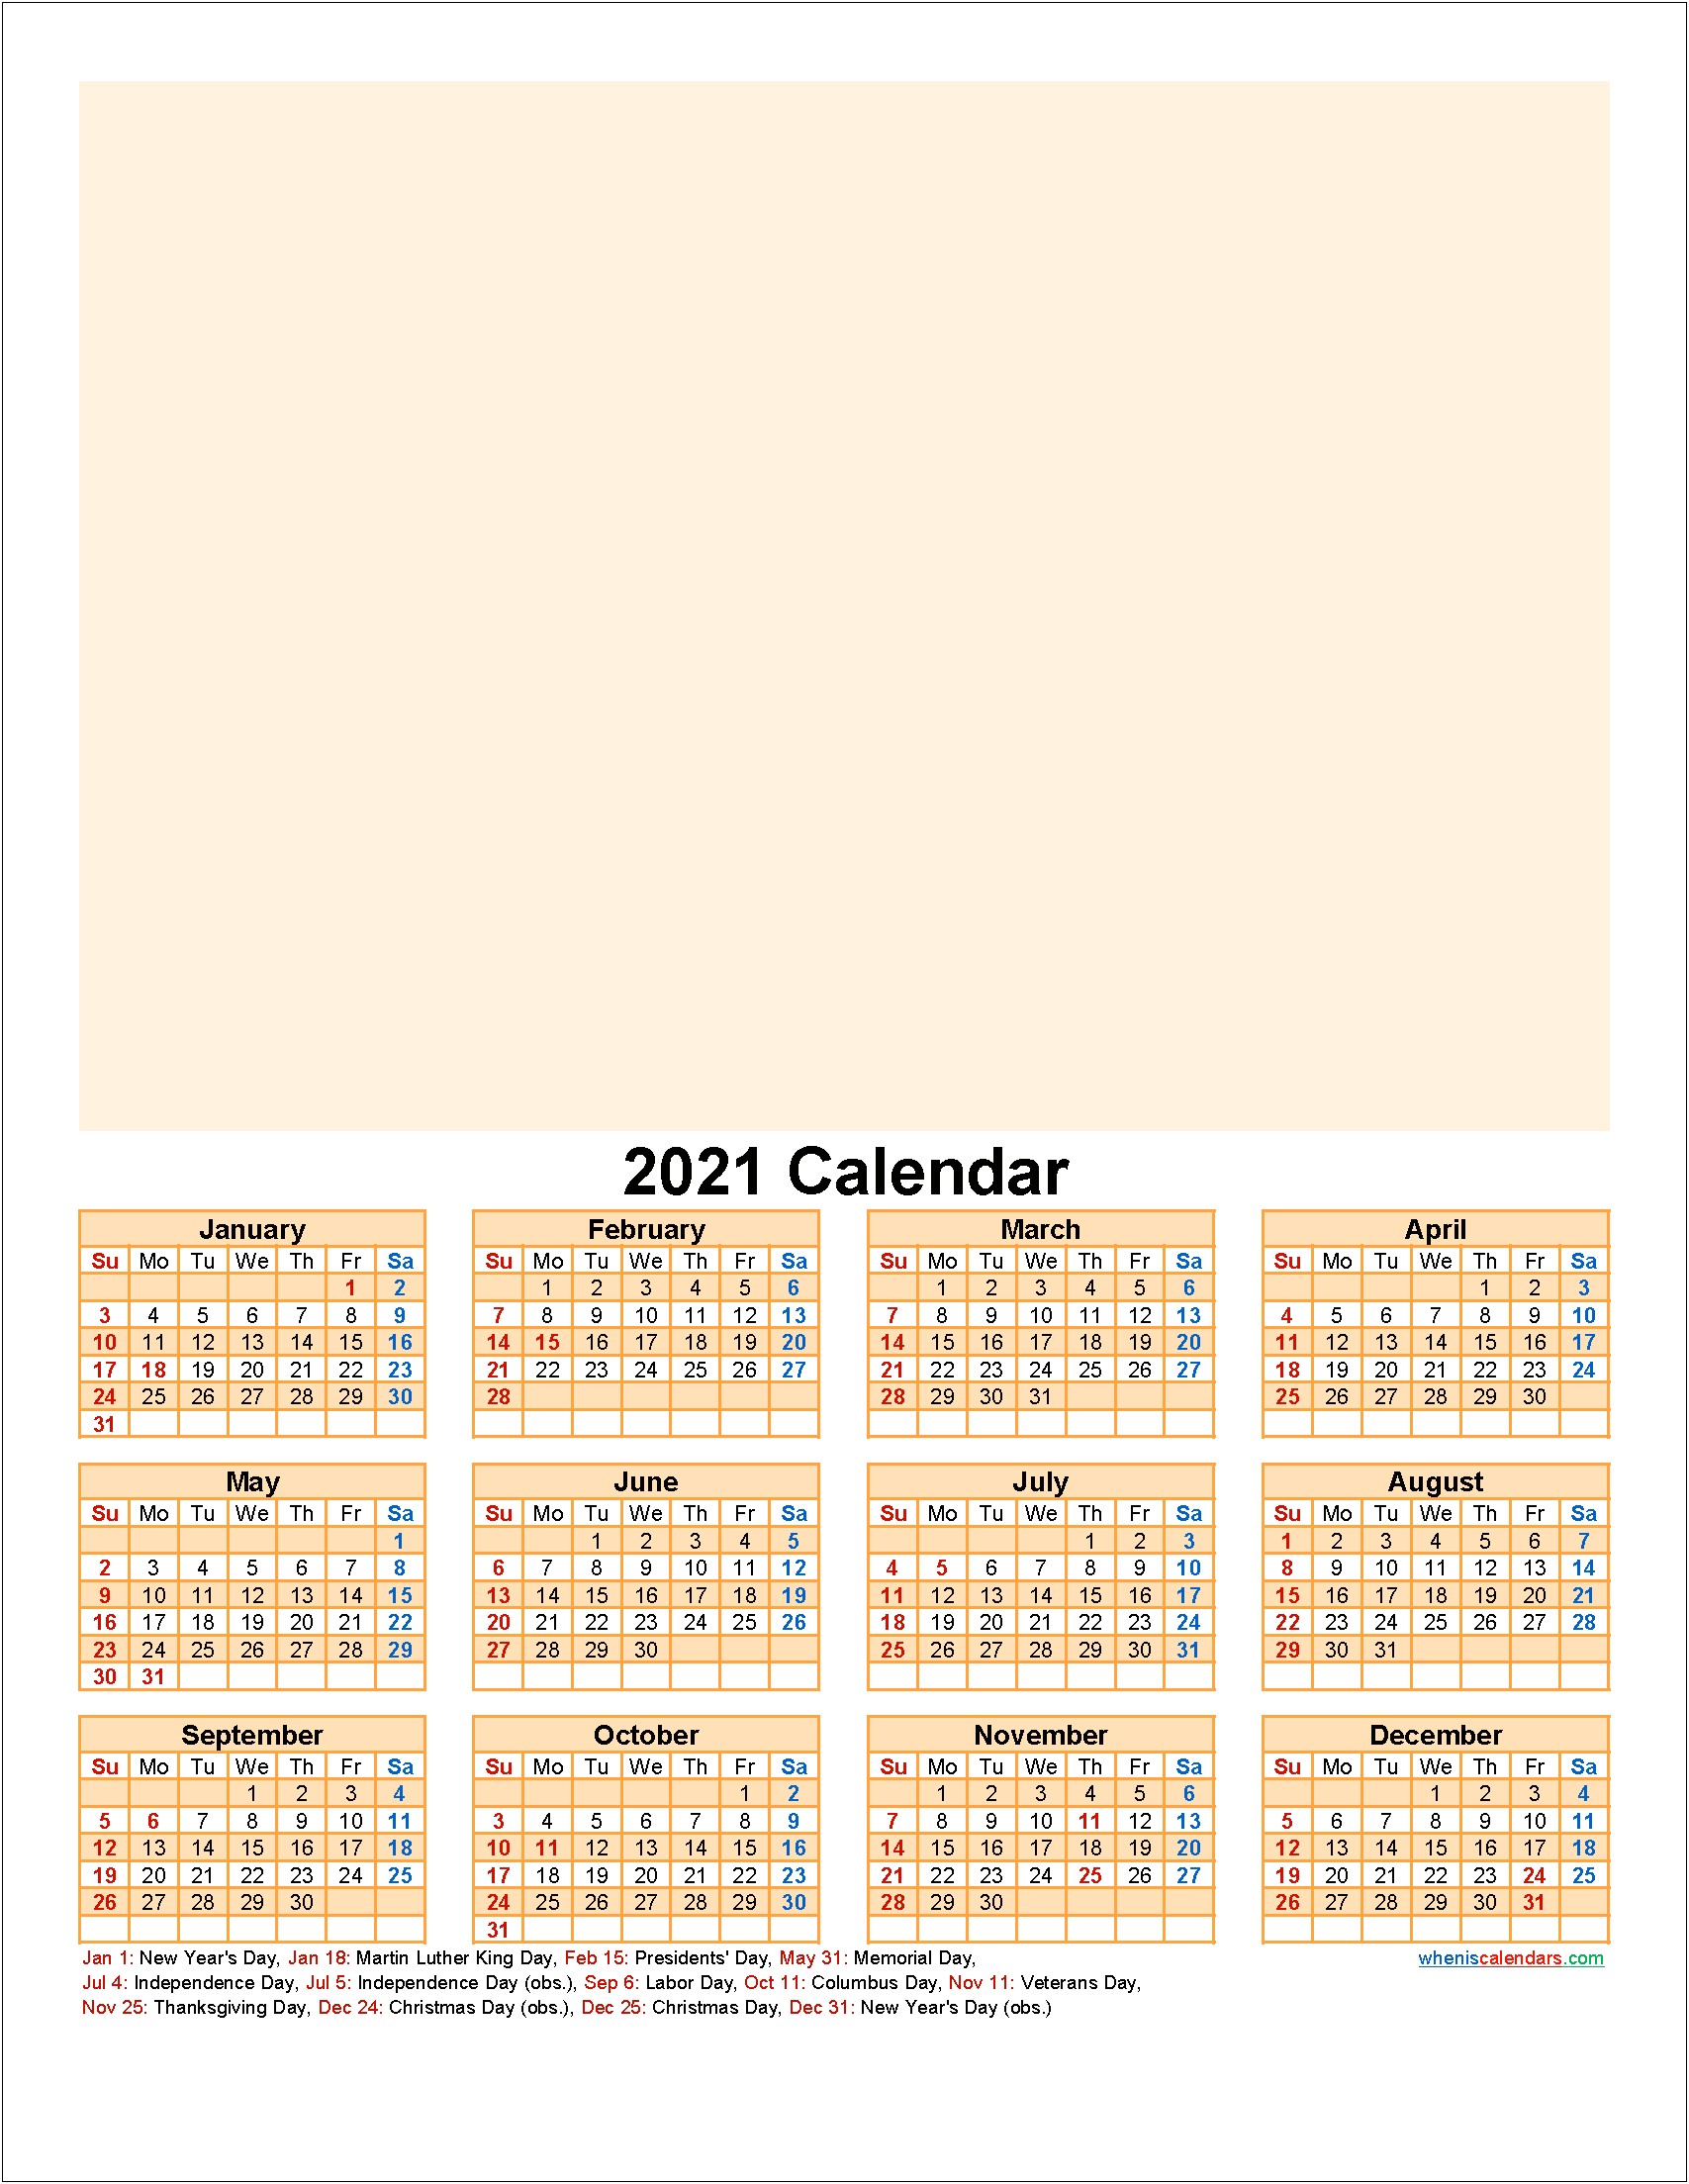 Create Your Own Calendar Template Free